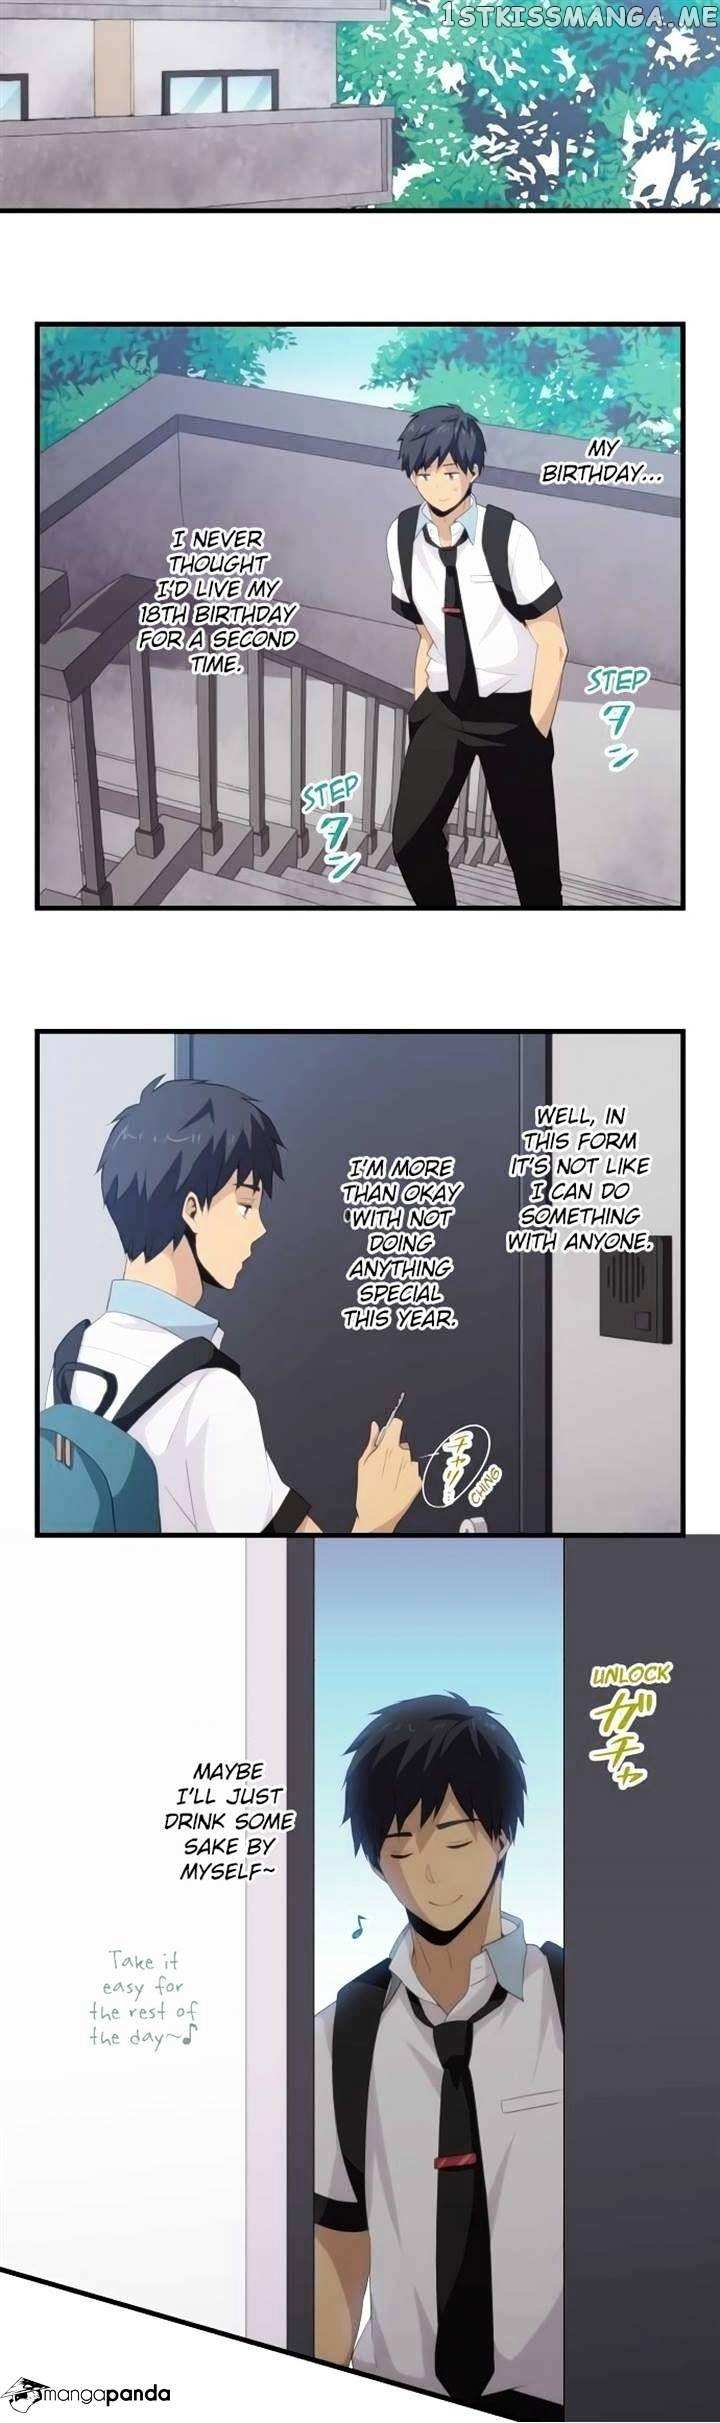 ReLIFE chapter 109 v2 - page 11